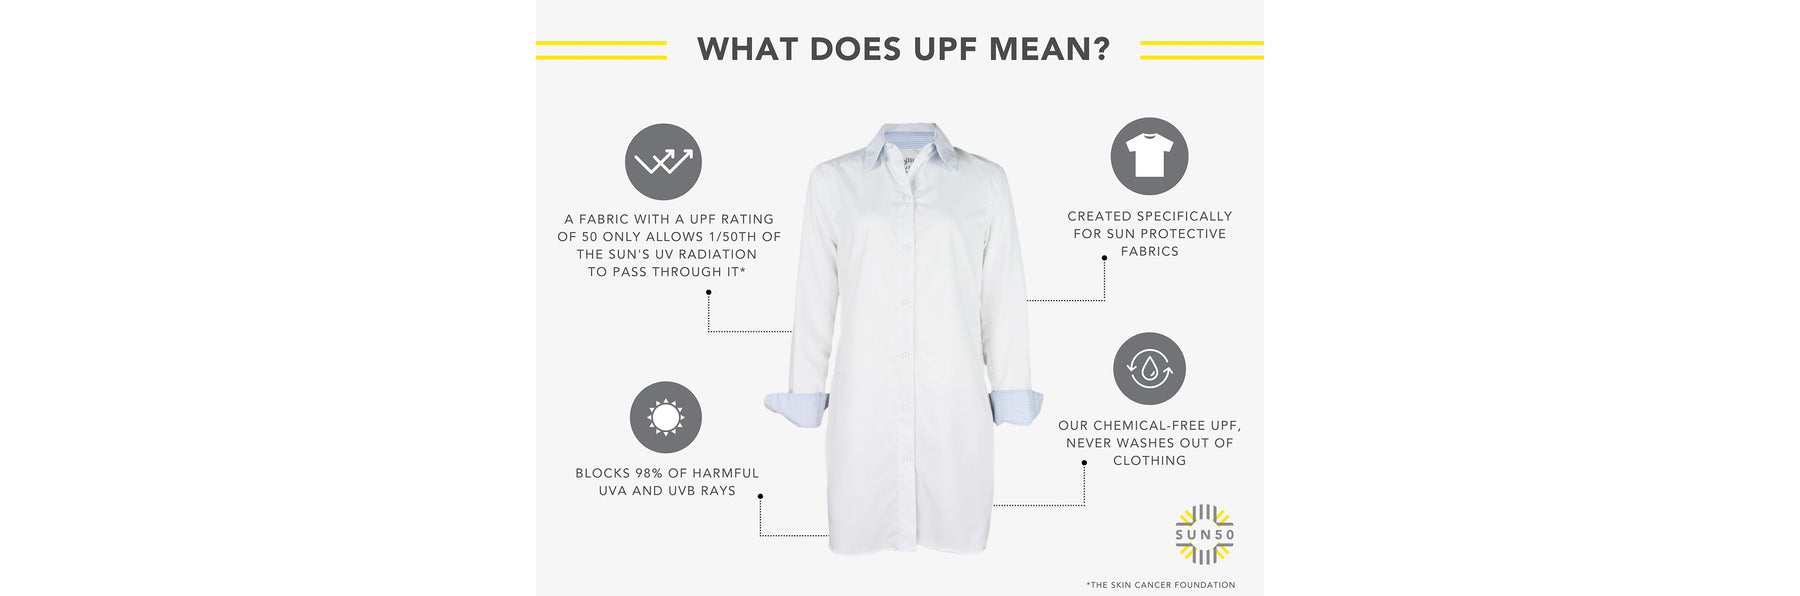 What does UPF Mean? Sun50 gets the highest rating in UPF clothing. UPF 50+ clothing blocks 98% of UVA/UVB Rays. Our Chemical-free UPF never Washes out of Clothing & we are made in the USA.